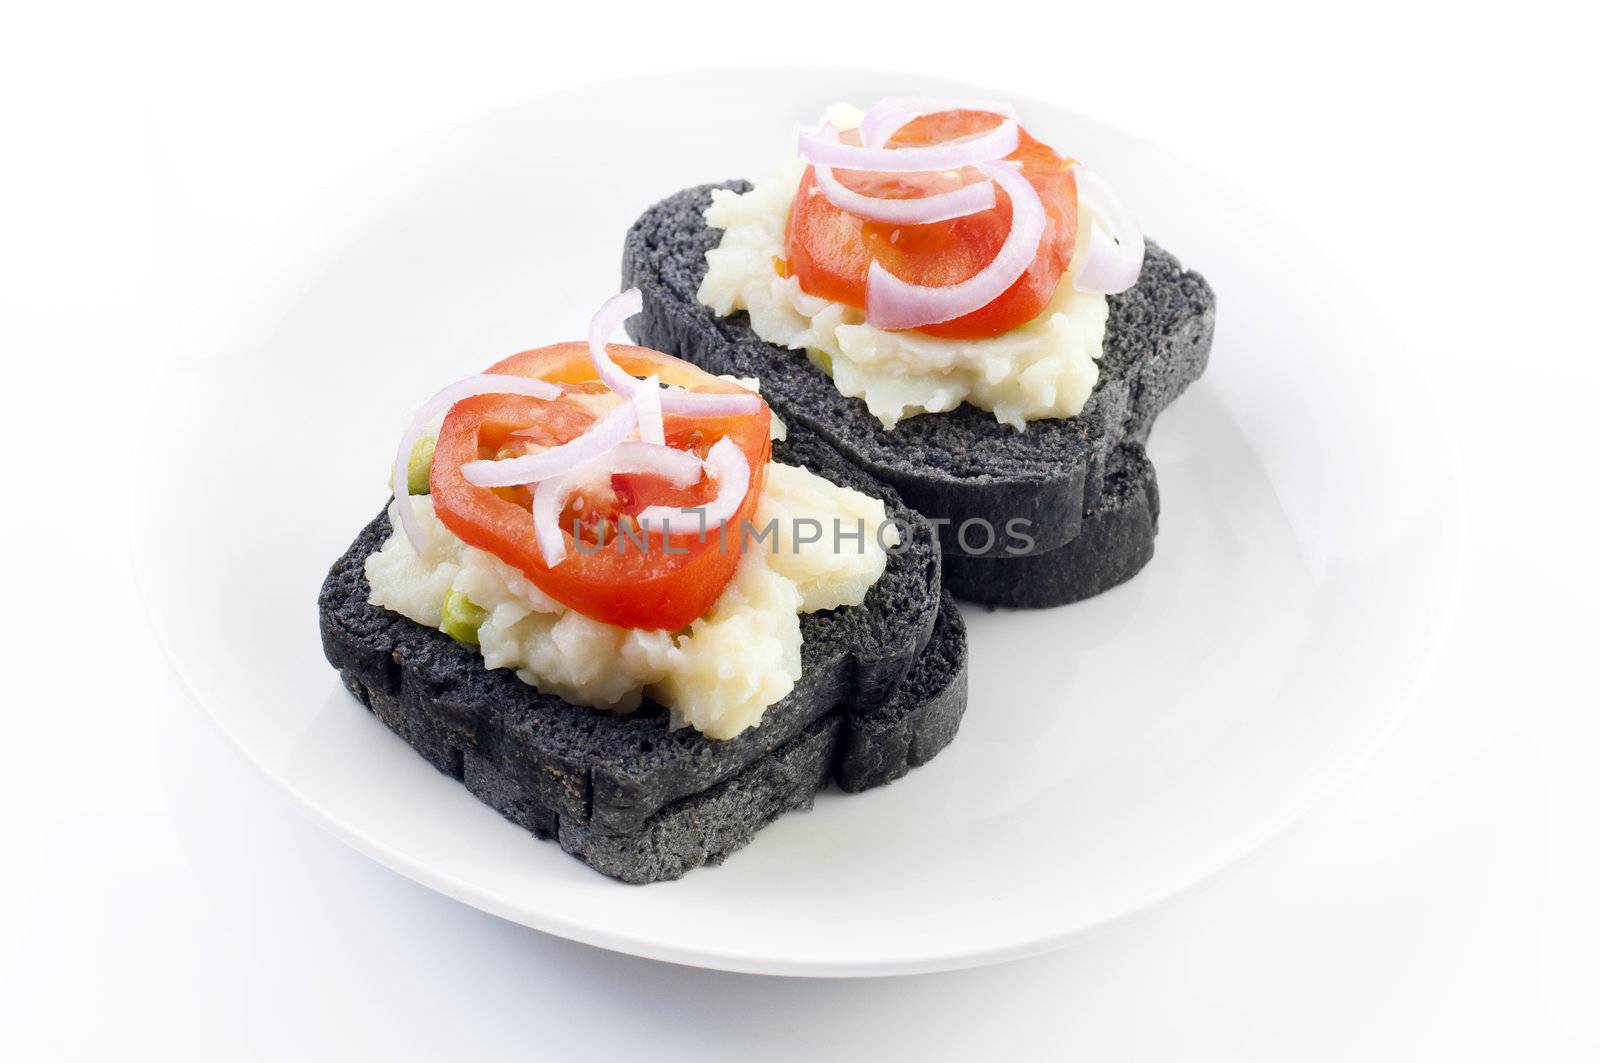 Black charcoal sandwich topped with mashed potato, tomato and onion.